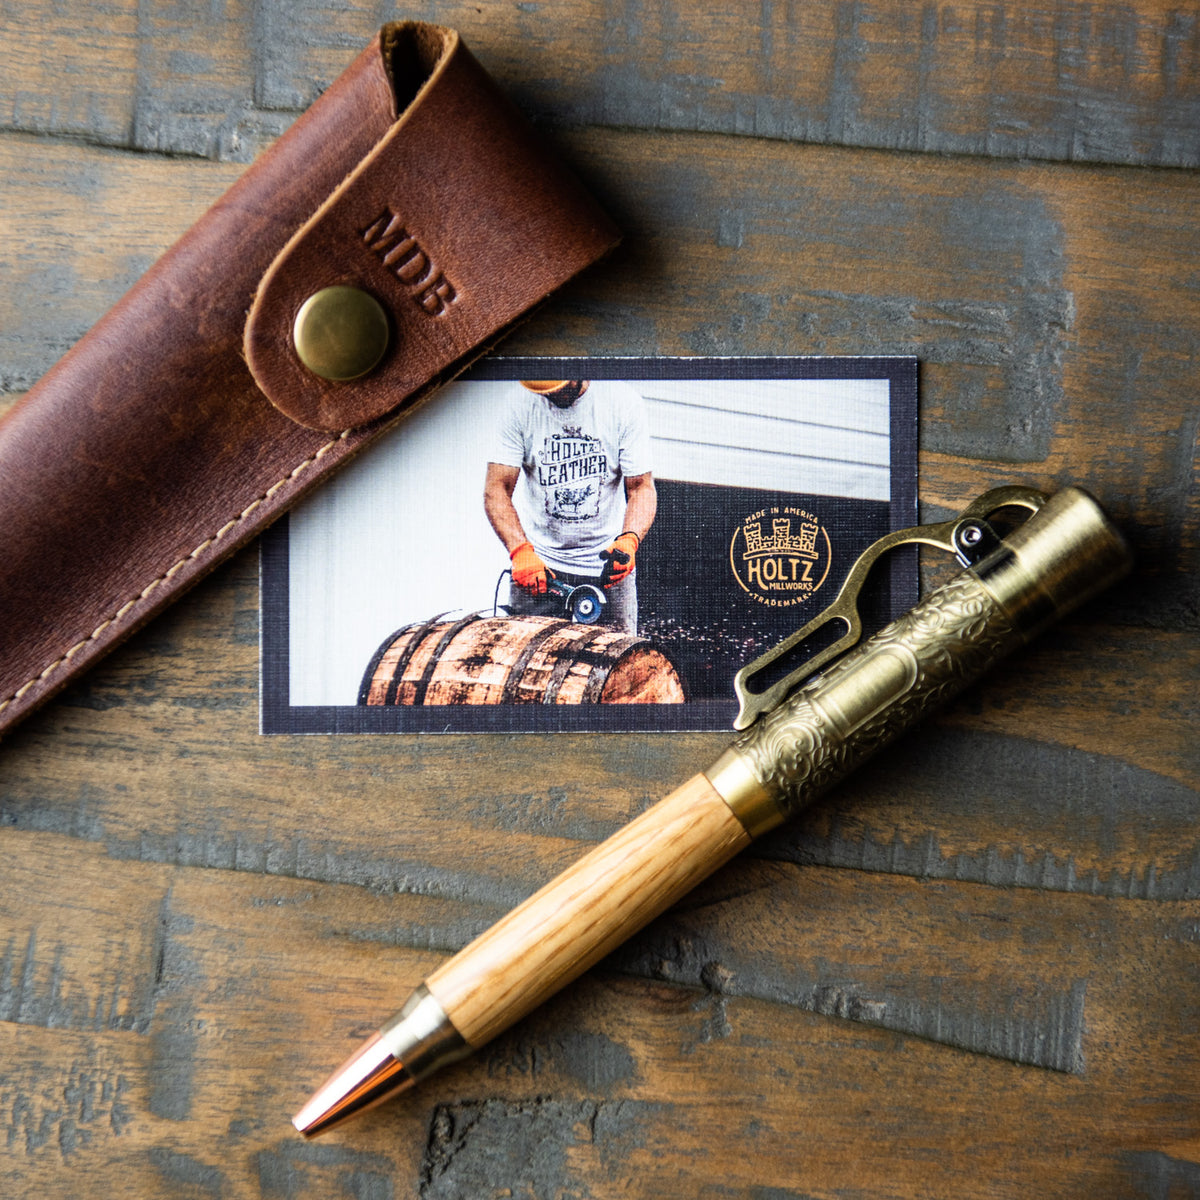 The Cowboy Lever Action Hand Turned Whiskey Barrel Pen + Pen Sleeve